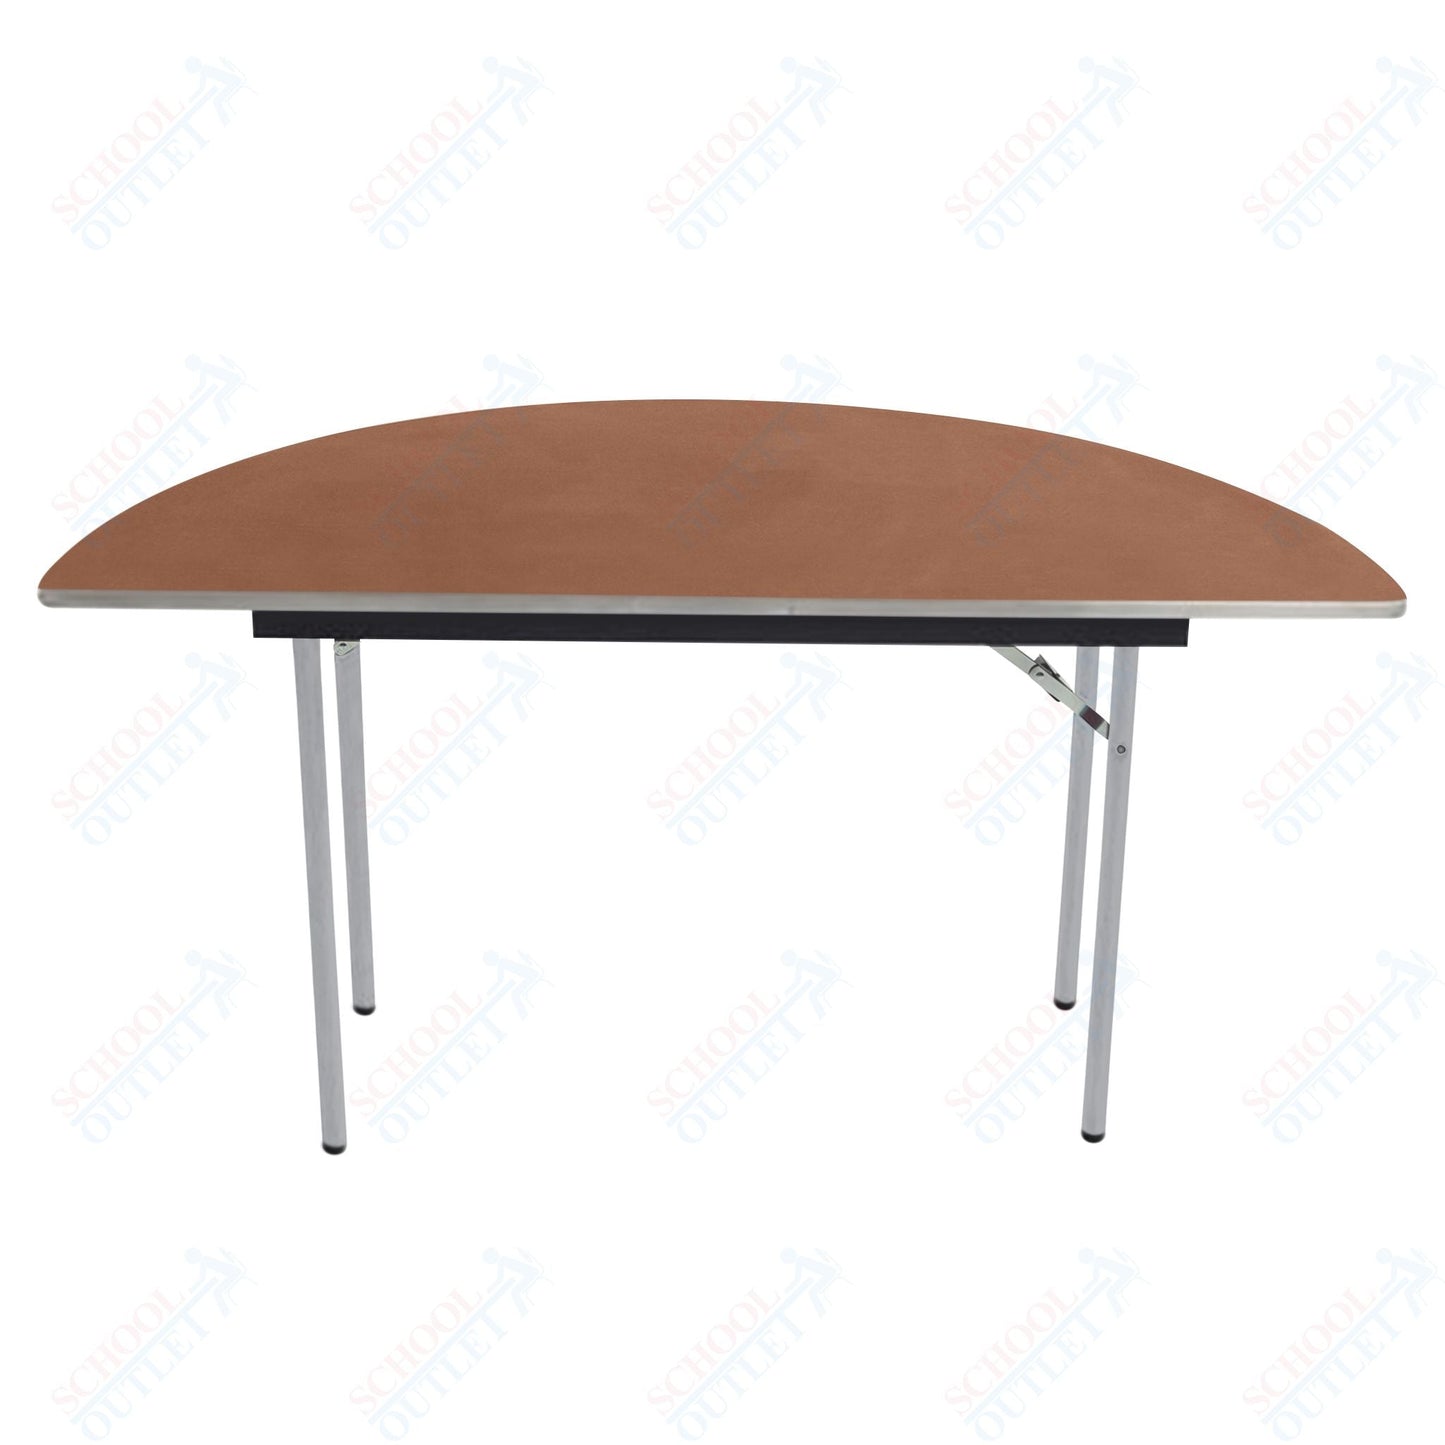 AmTab Folding Table - Plywood Stained and Sealed - Aluminum Edge - Half Round - Half 96" Diameter x 29"H (AmTab AMT - HR96PA) - SchoolOutlet